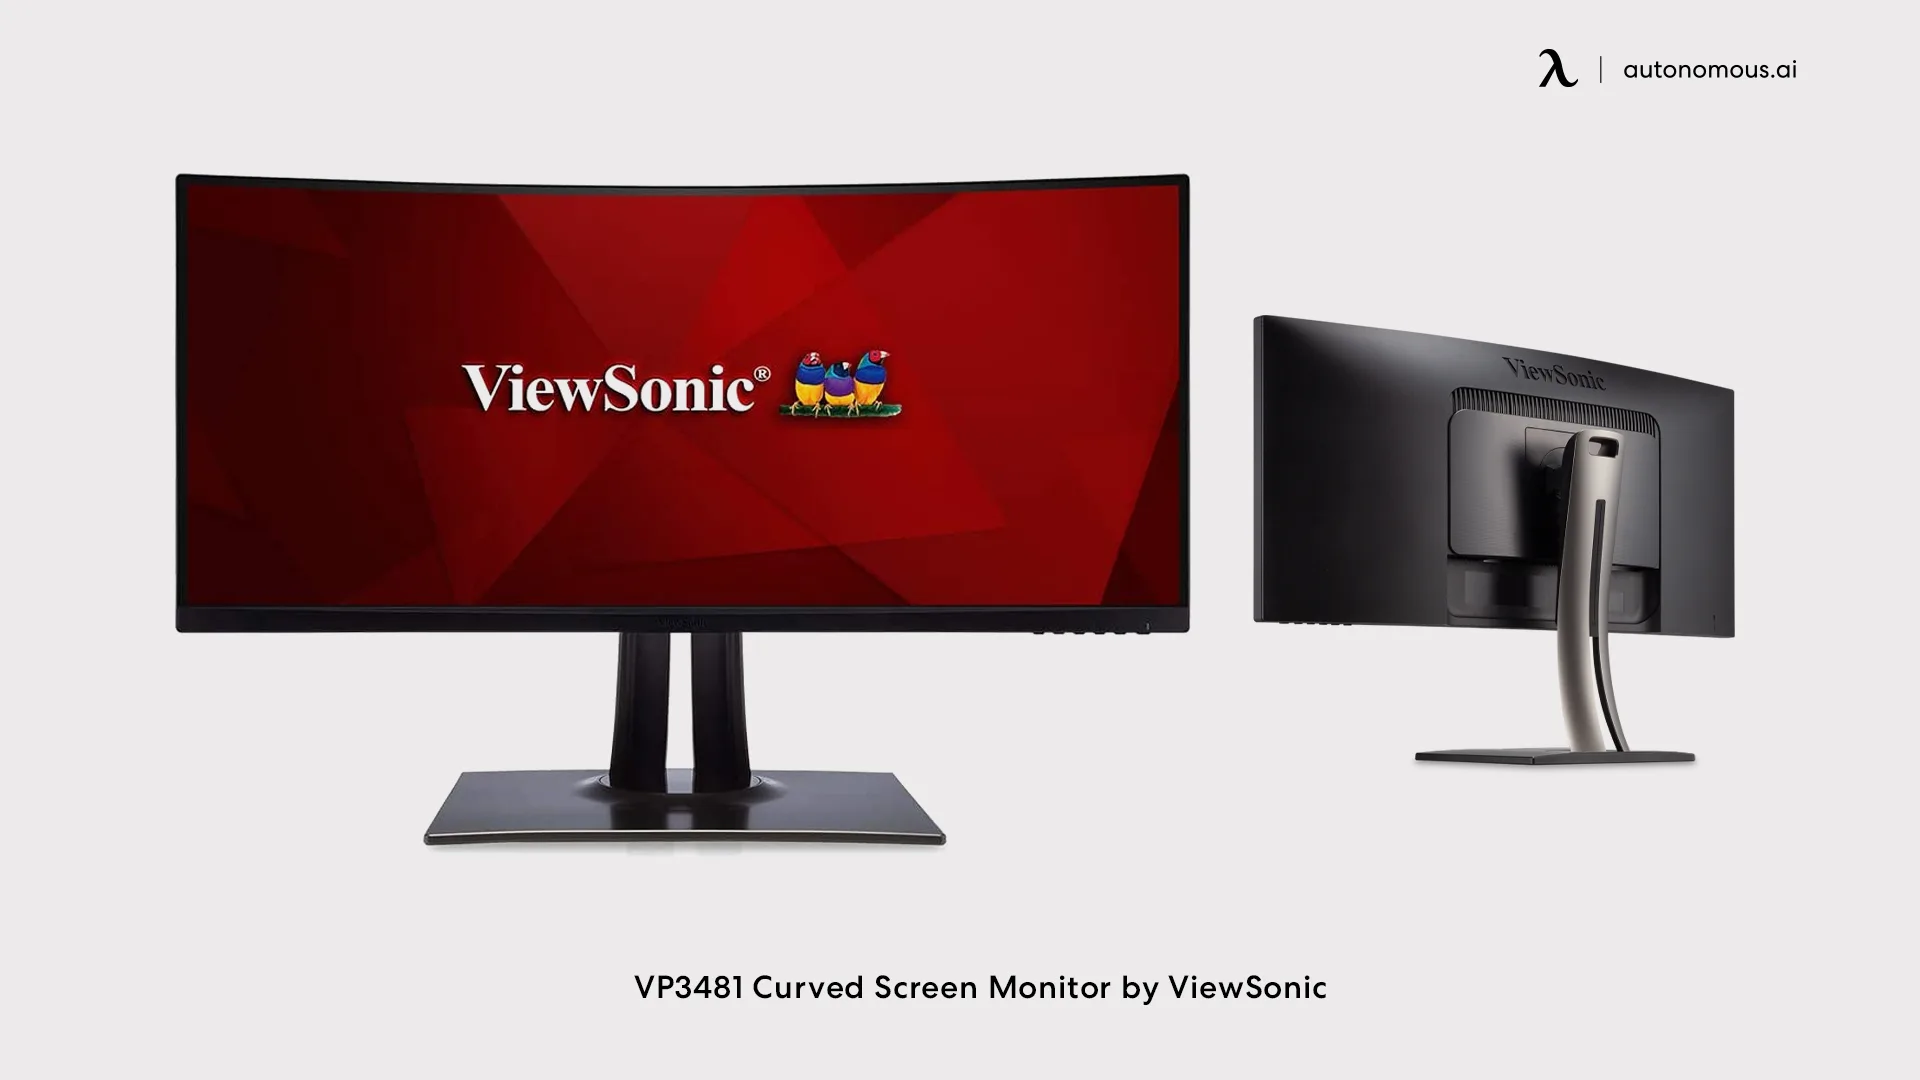 VP3481 Curved Screen Monitor by ViewSonic